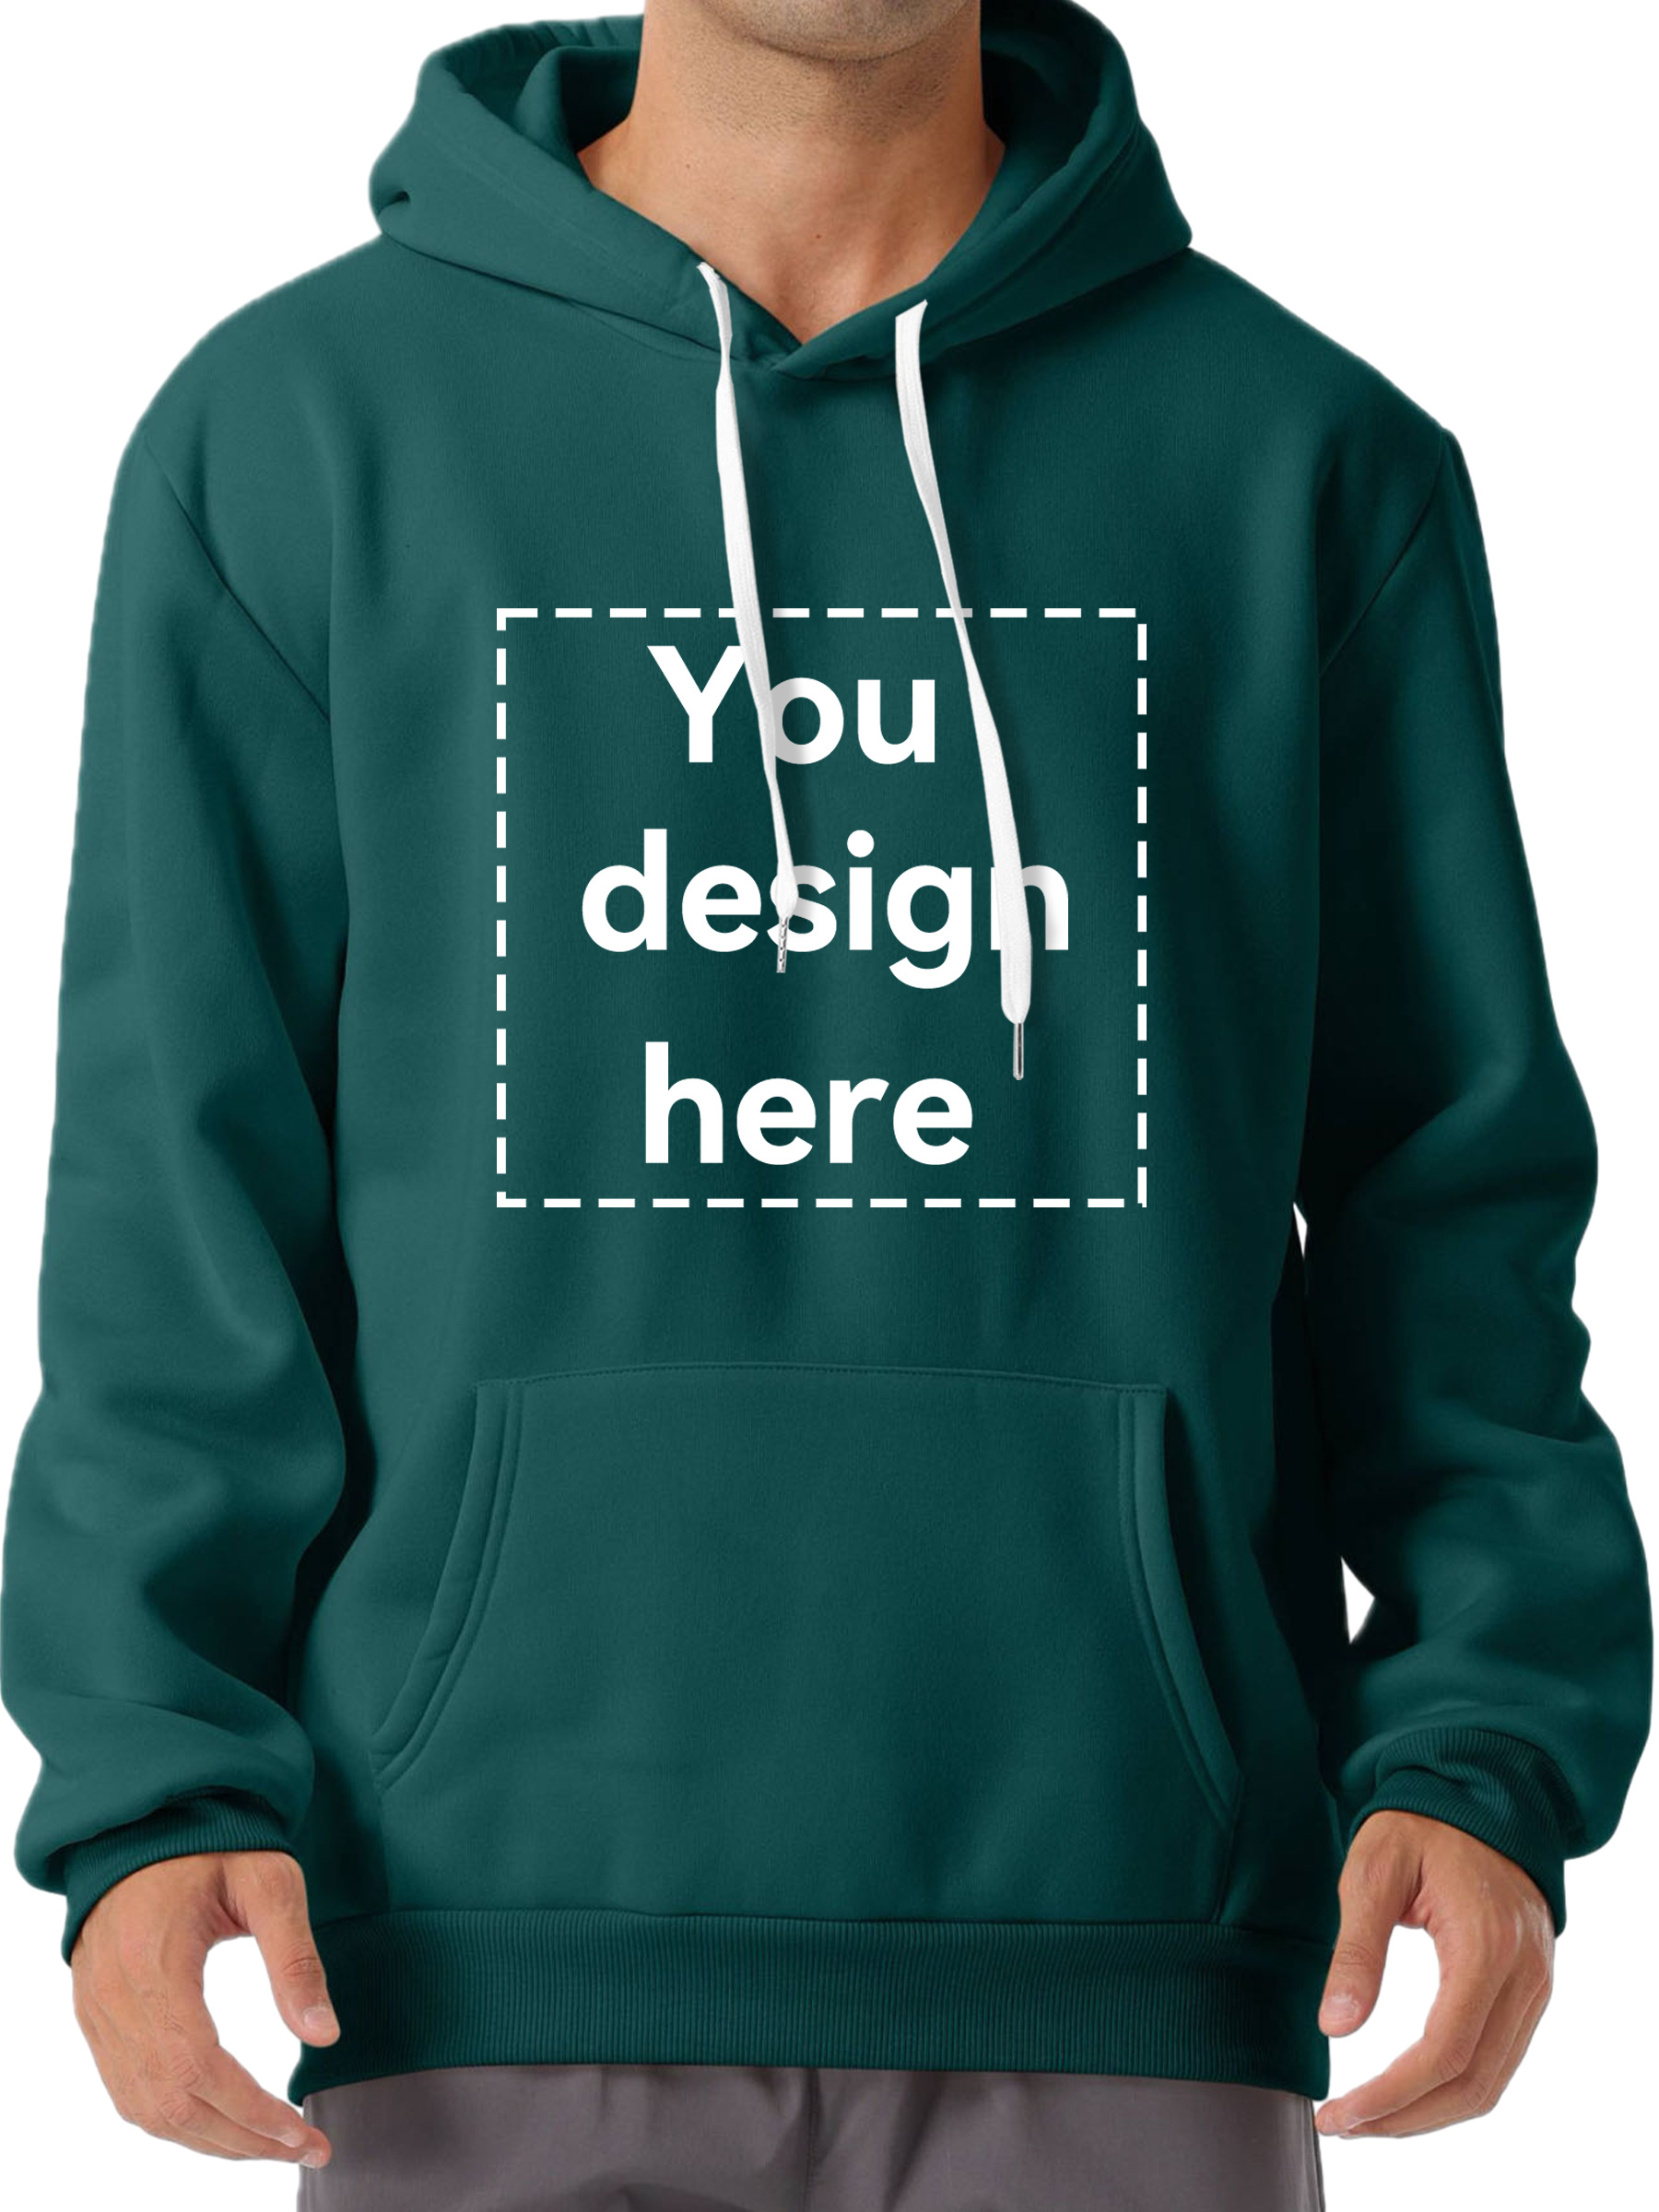 you design here letter print customized kangaroo pocket hoodie casual long sleeve hoodies pullover sweatshirt mens clothing for fall winter details 5